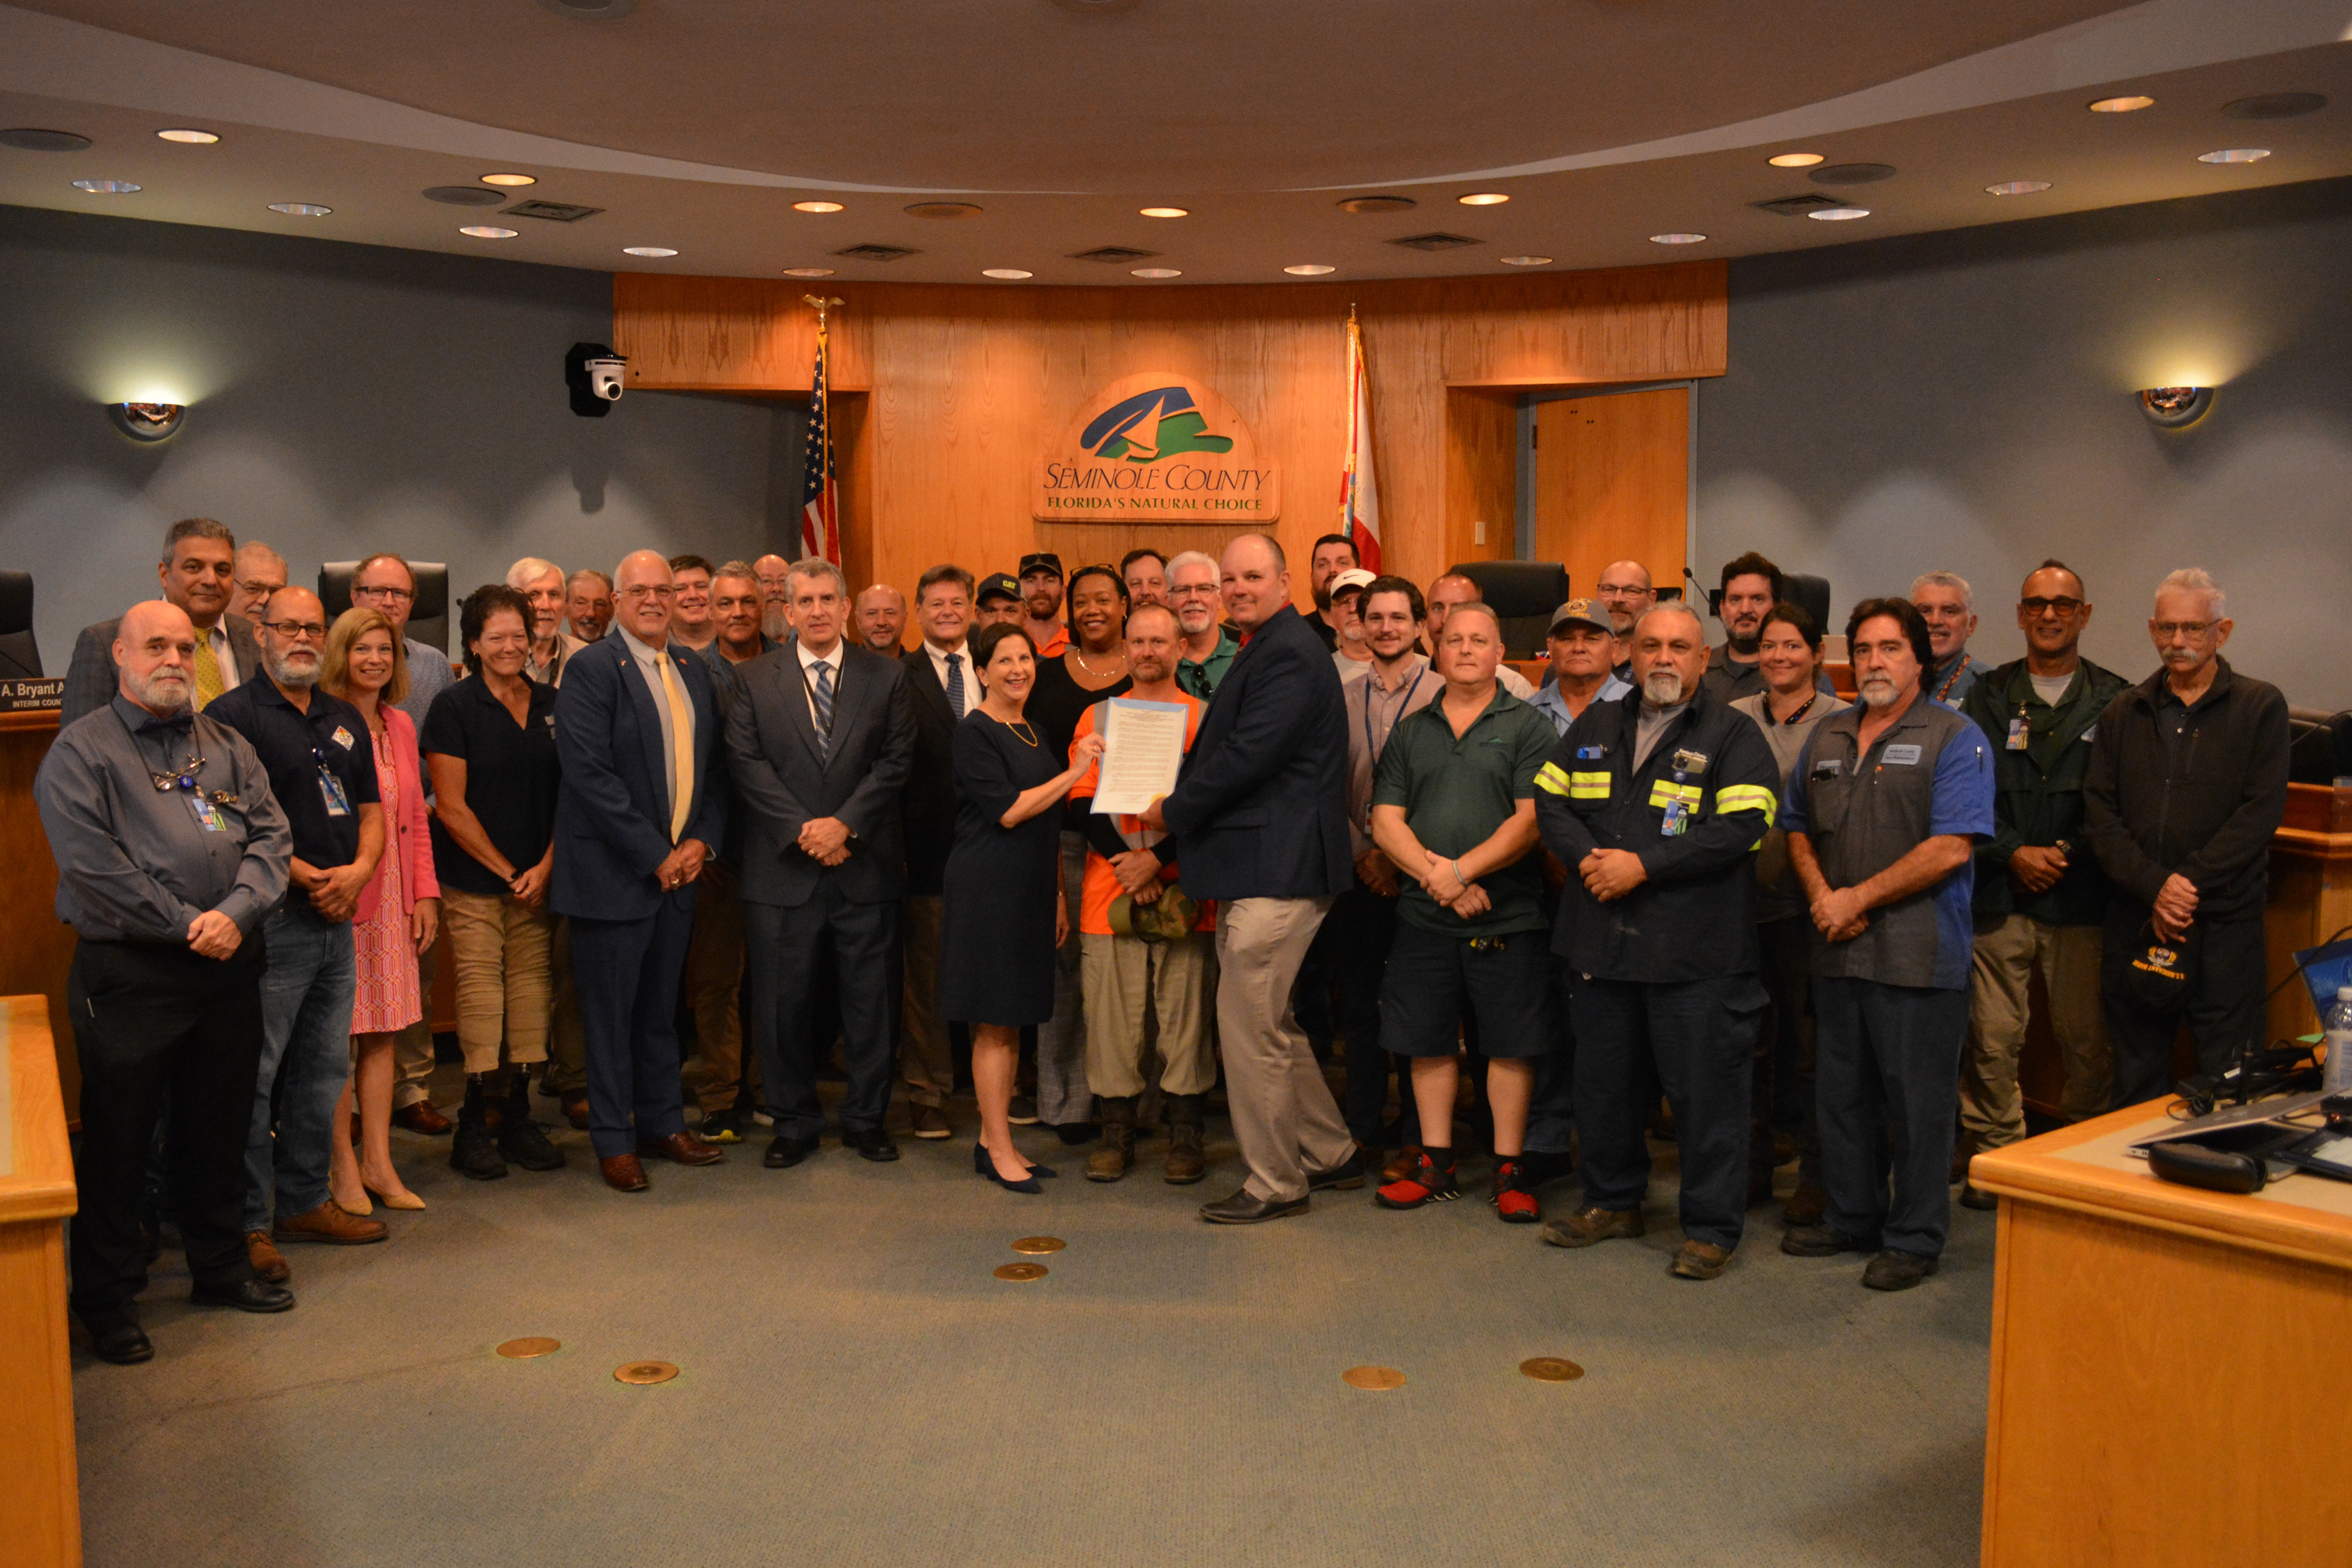 Proclamation — Proclaiming November 11, 2022, Veterans Day and Recognizing Seminole County Veterans for their Outstanding Service to The United States and Seminole County (Jason Althouse, Veteran Services Manager)